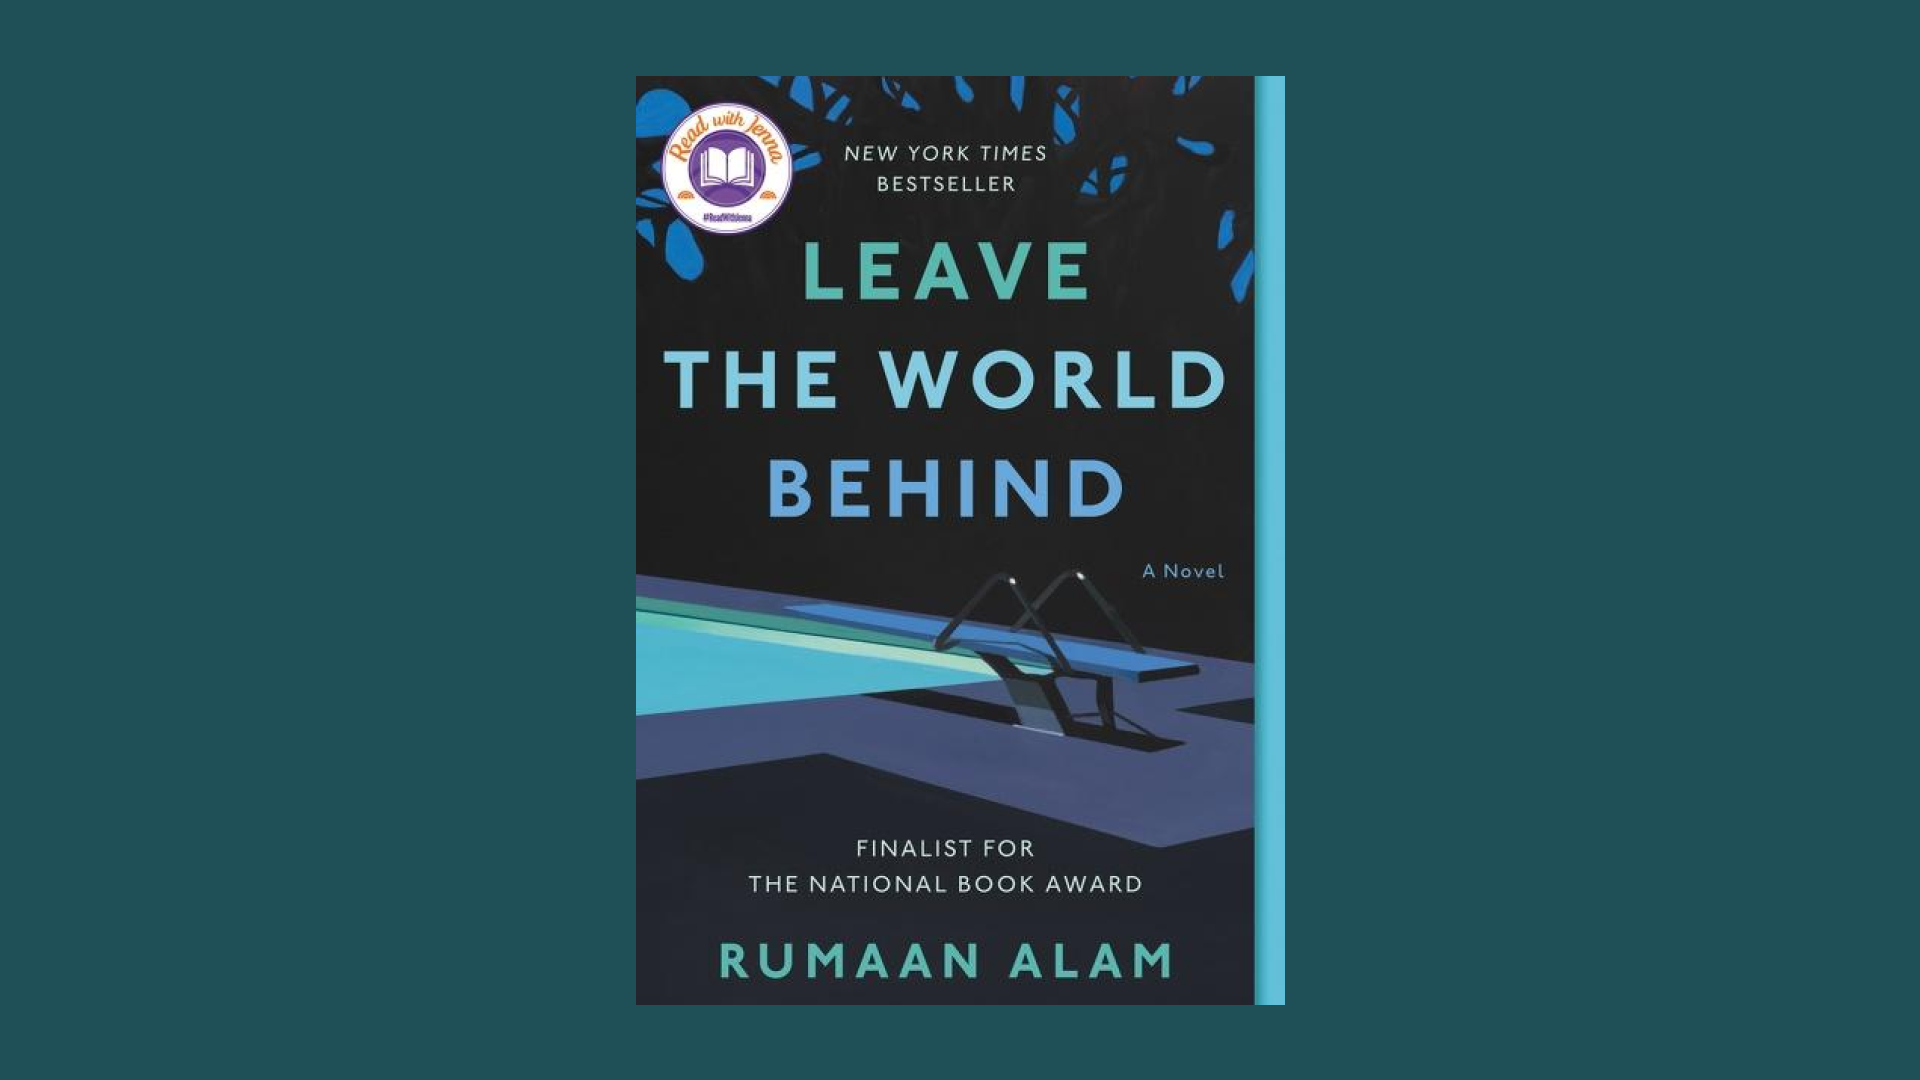 “Leave the World Behind” by Rumaan Alam